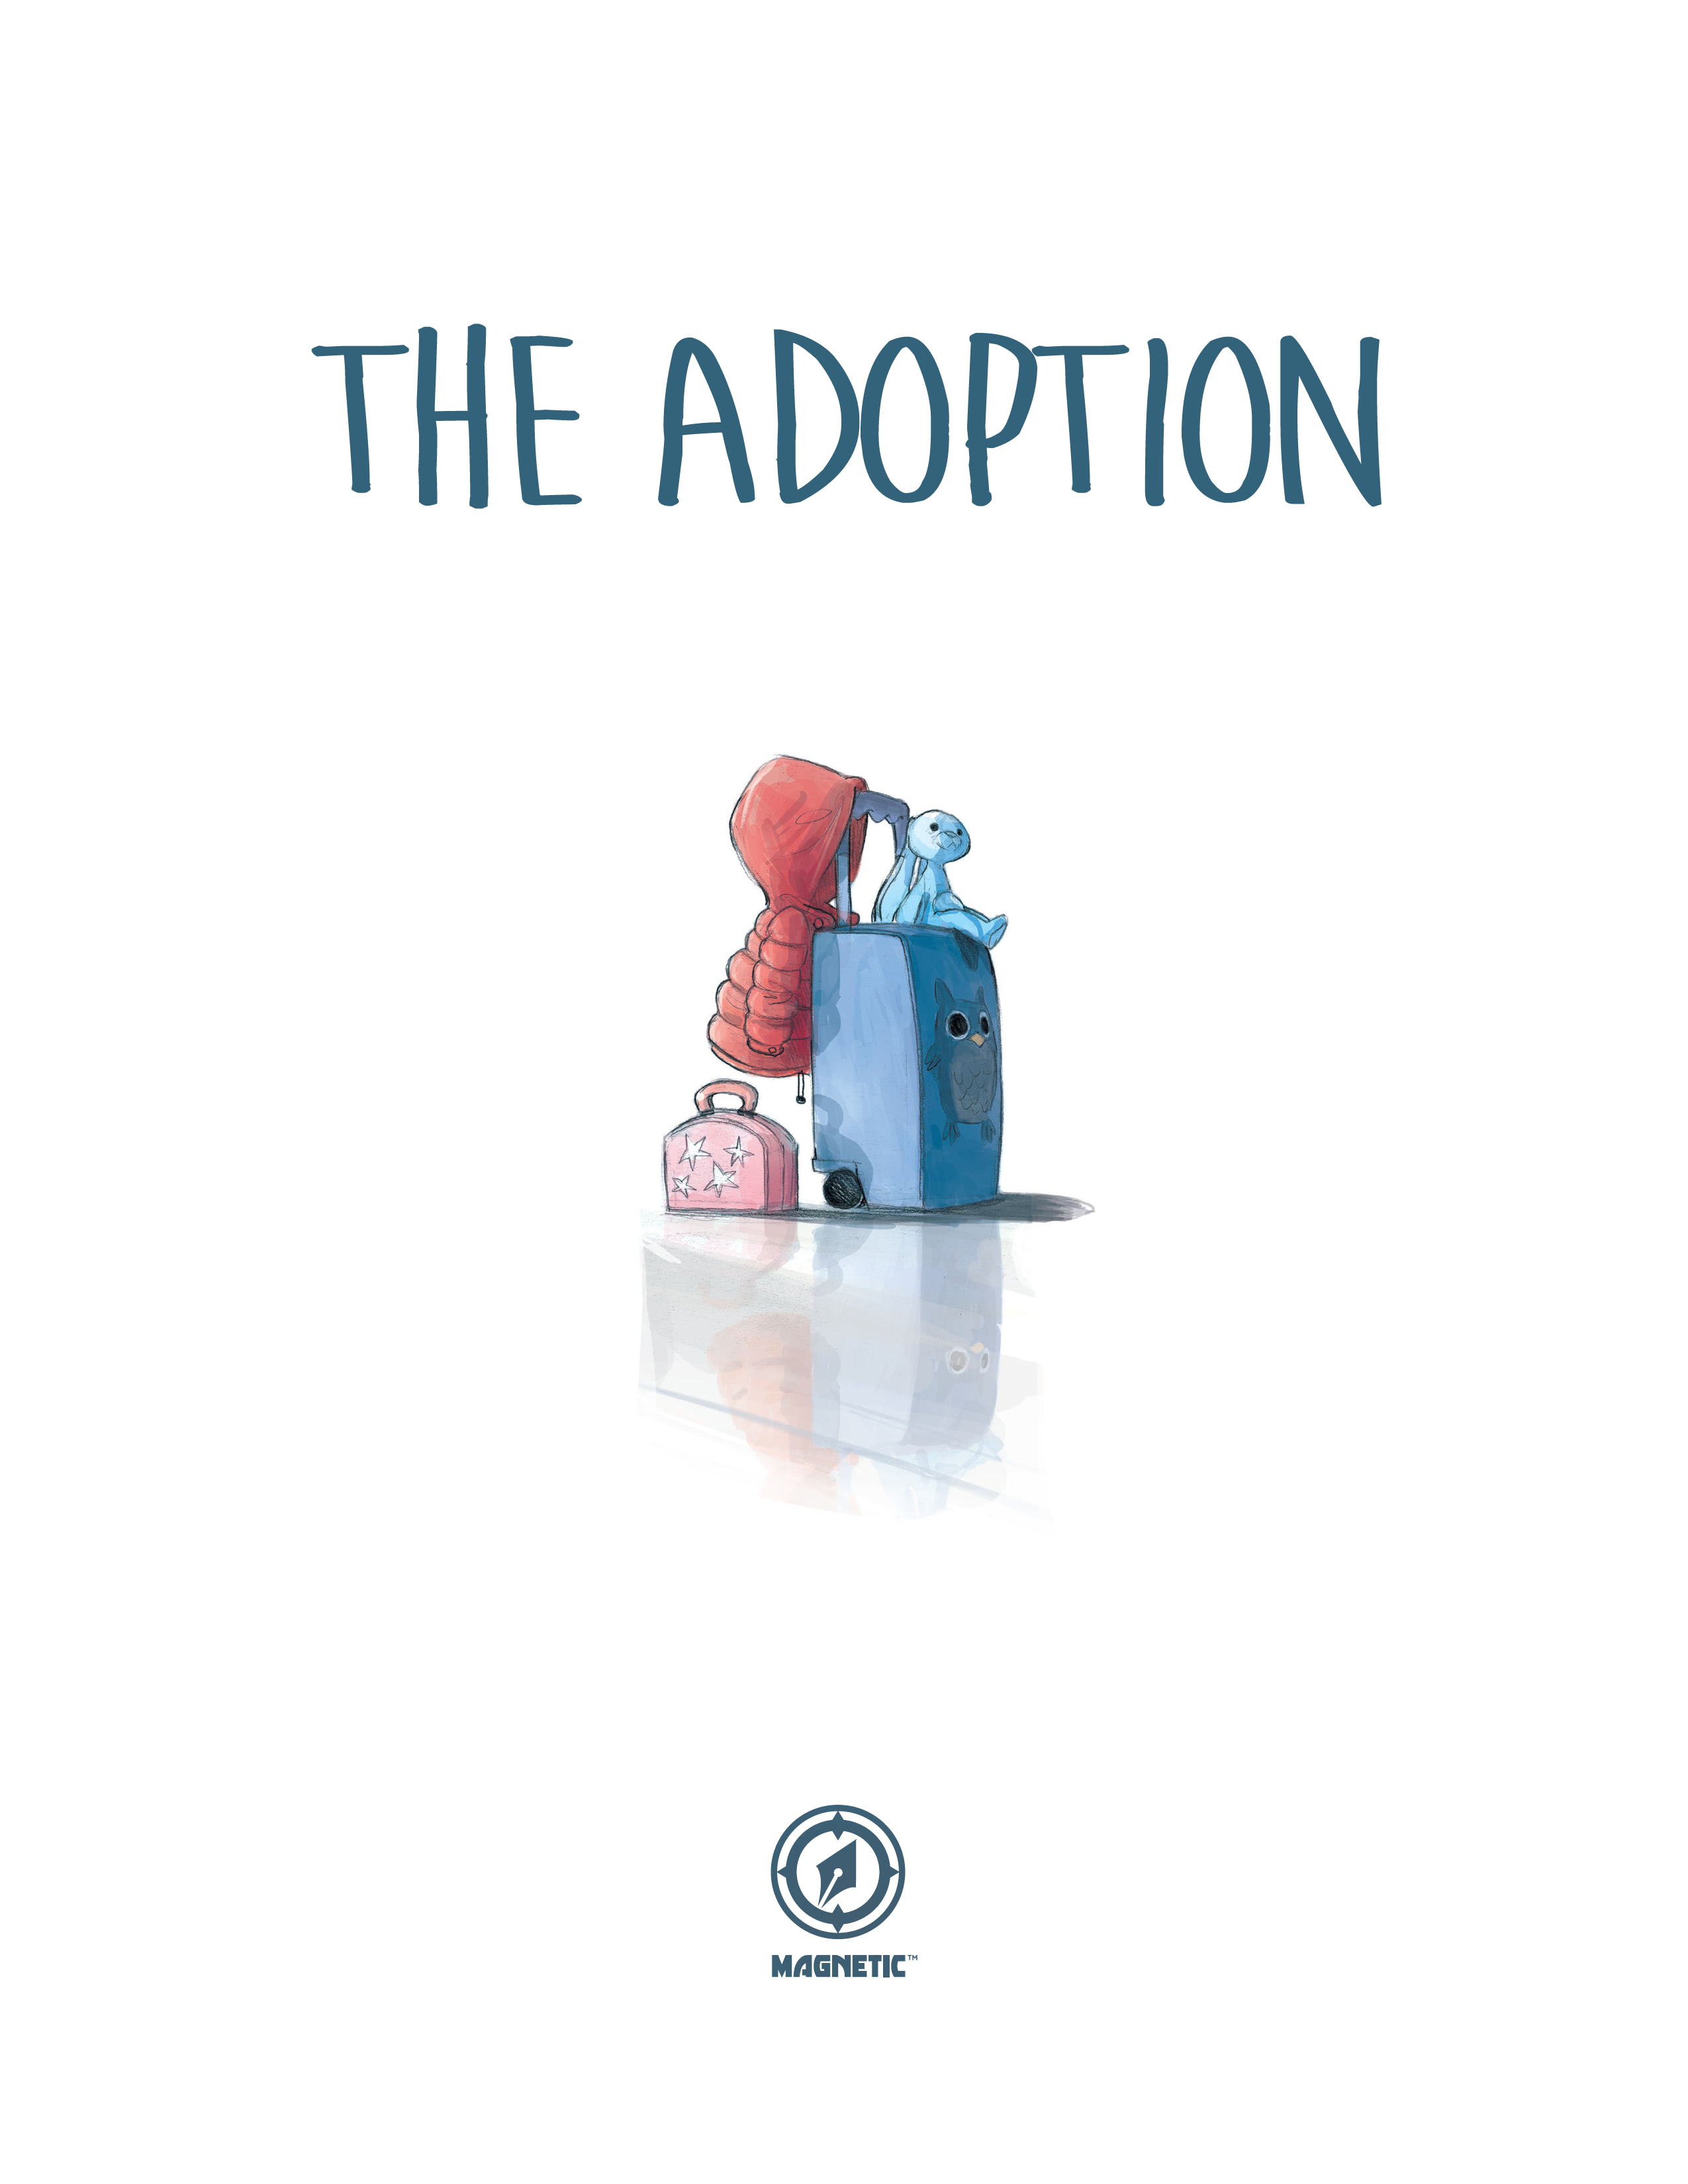 Read online The Adoption comic -  Issue # TPB 1 - 2